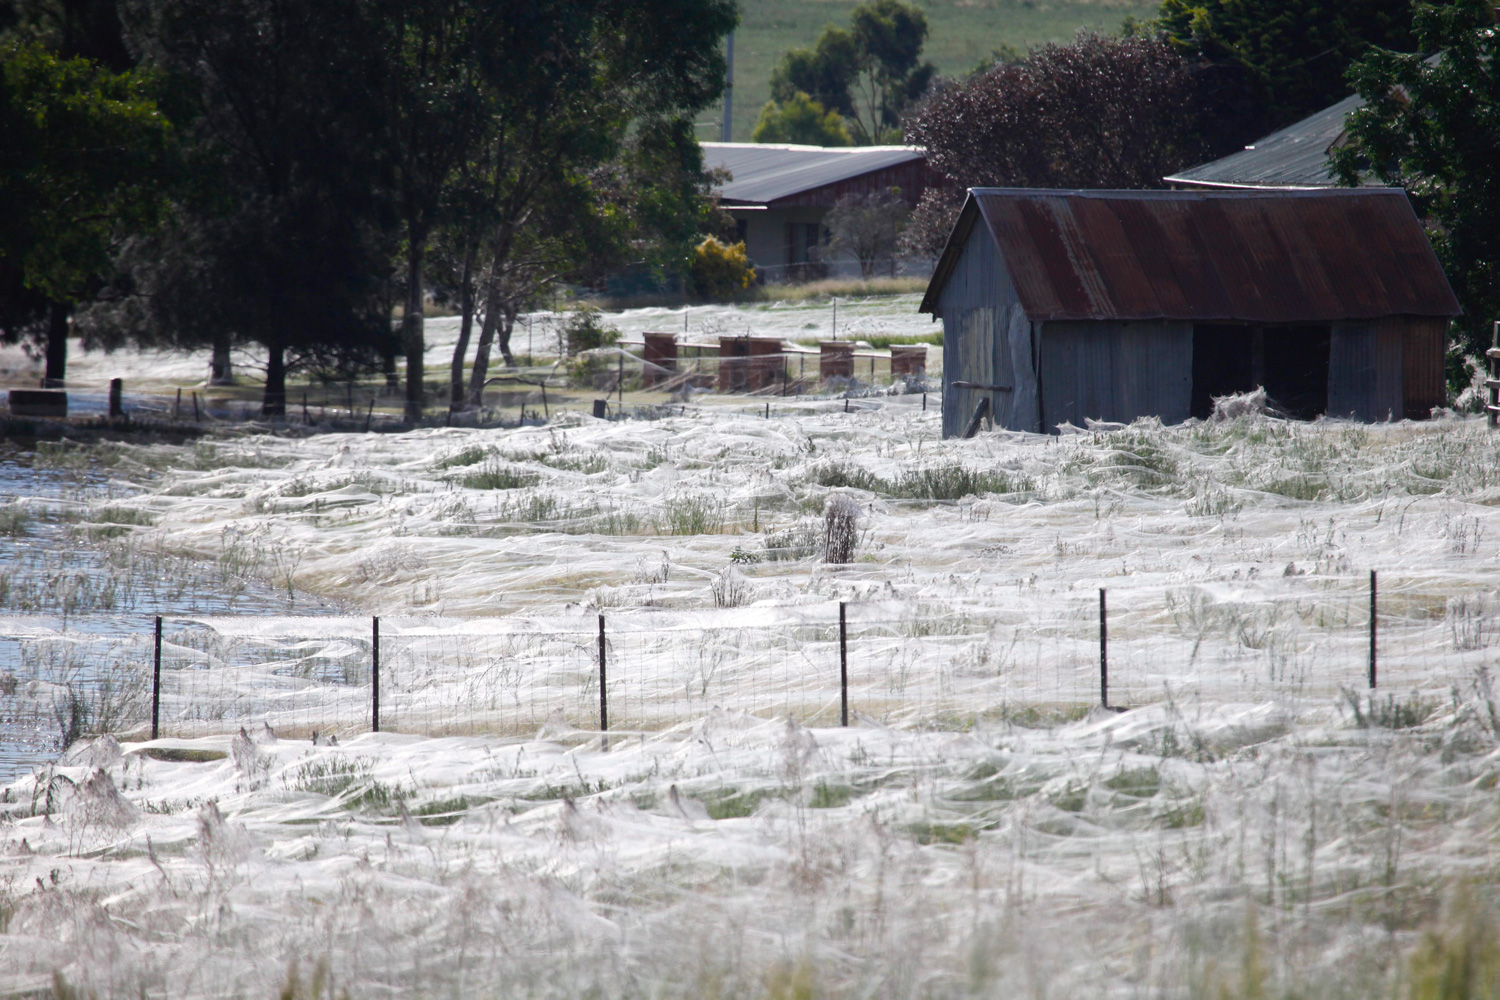 March 6, 2012. Thousands of spiders build new spider webs after flood waters forced them to move to higher grounds in Wagga Wagga, New South Wales, Australia.